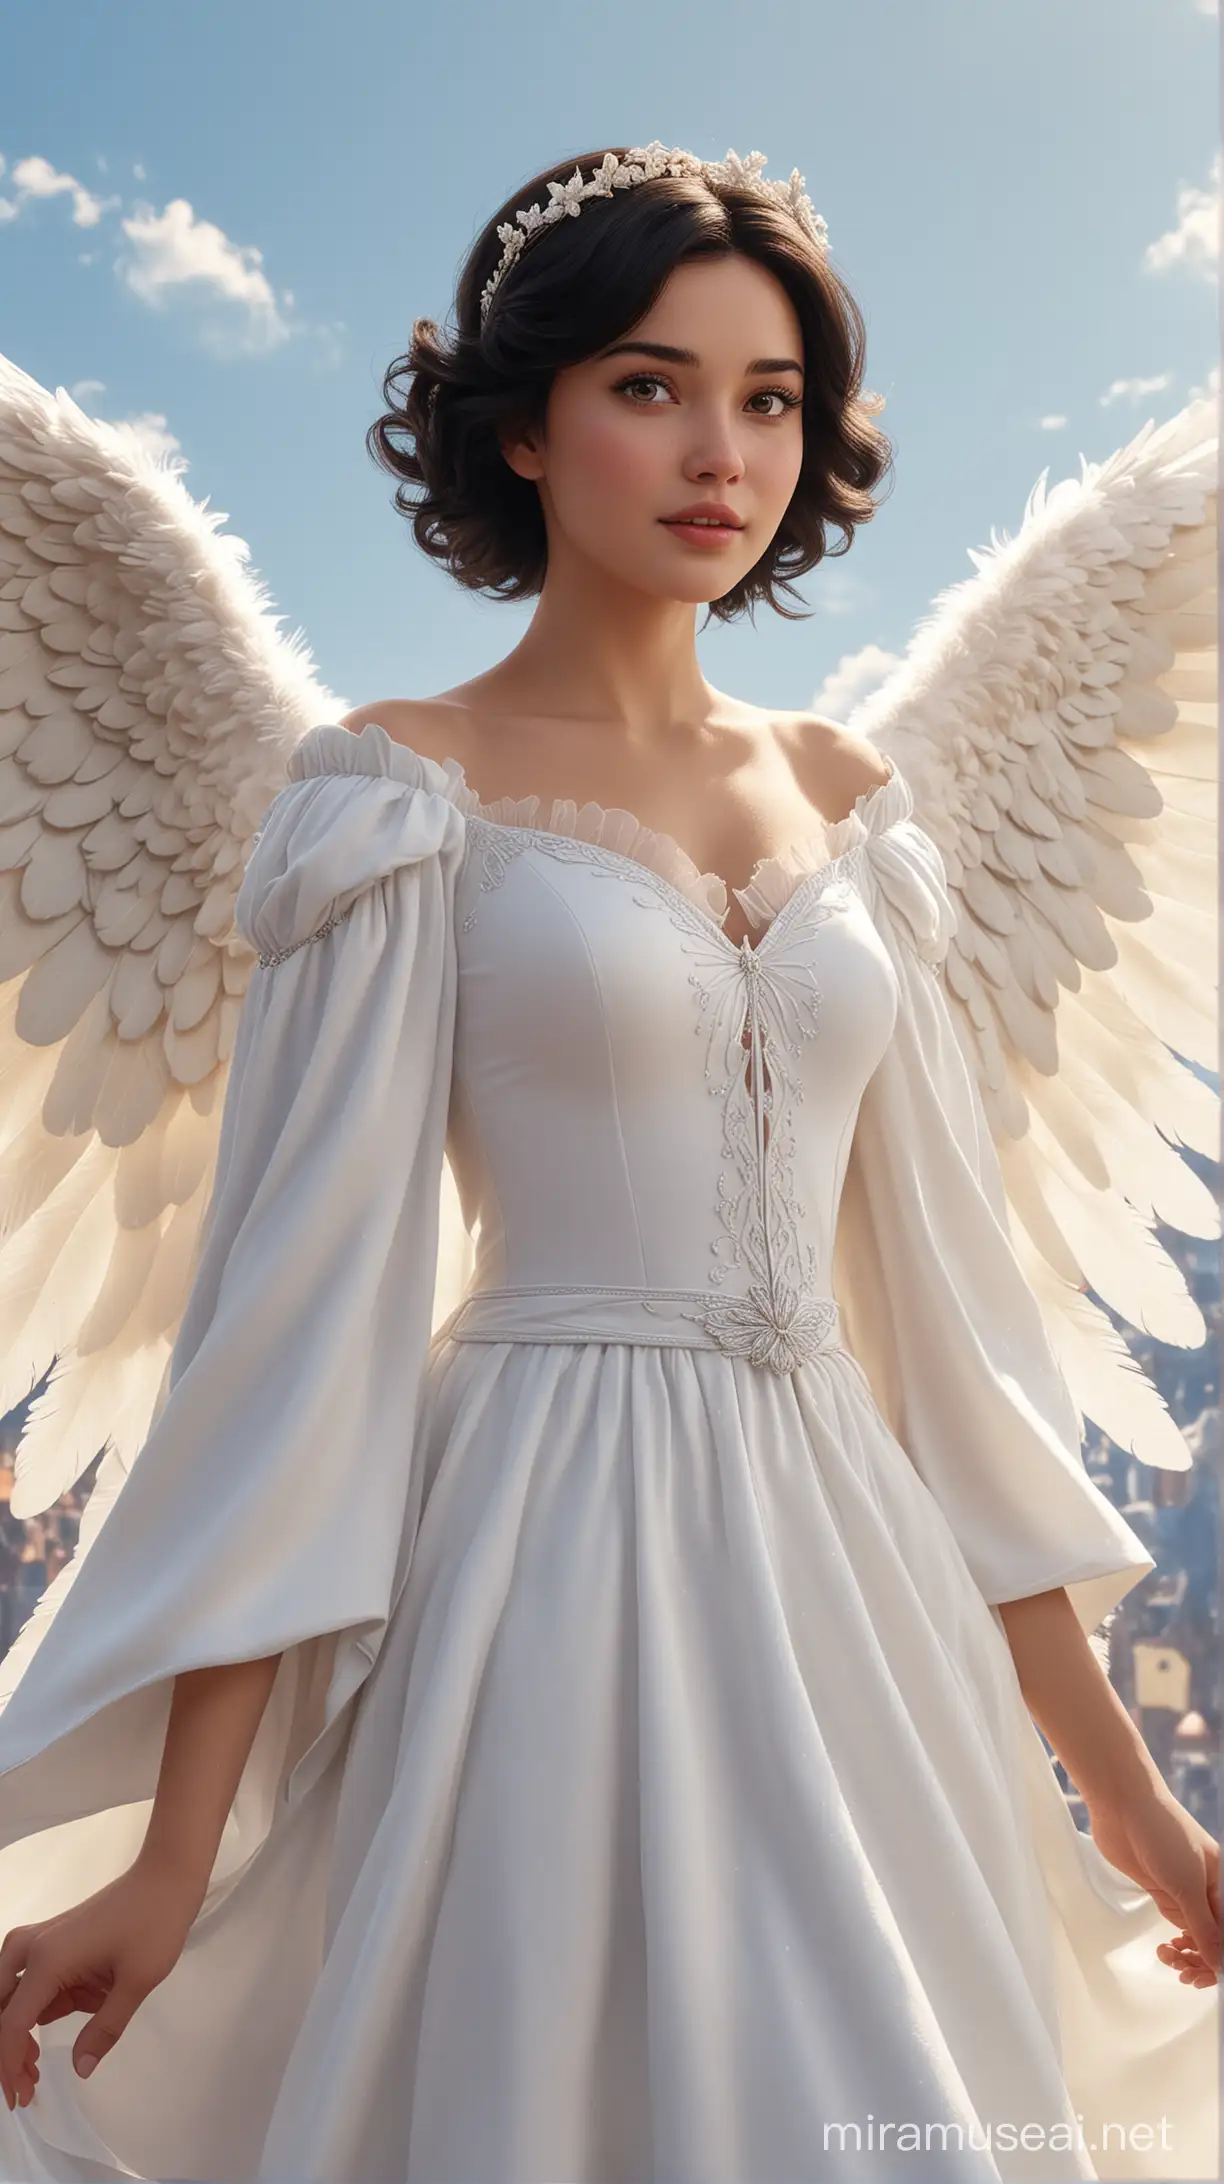 in the sky natural background  there are disney princess Snow-White  Germany 18-years and Black bob hair and brown eyes and celestial white dress and with large white angel wings face beautiful 8k re solution ultra-realistic